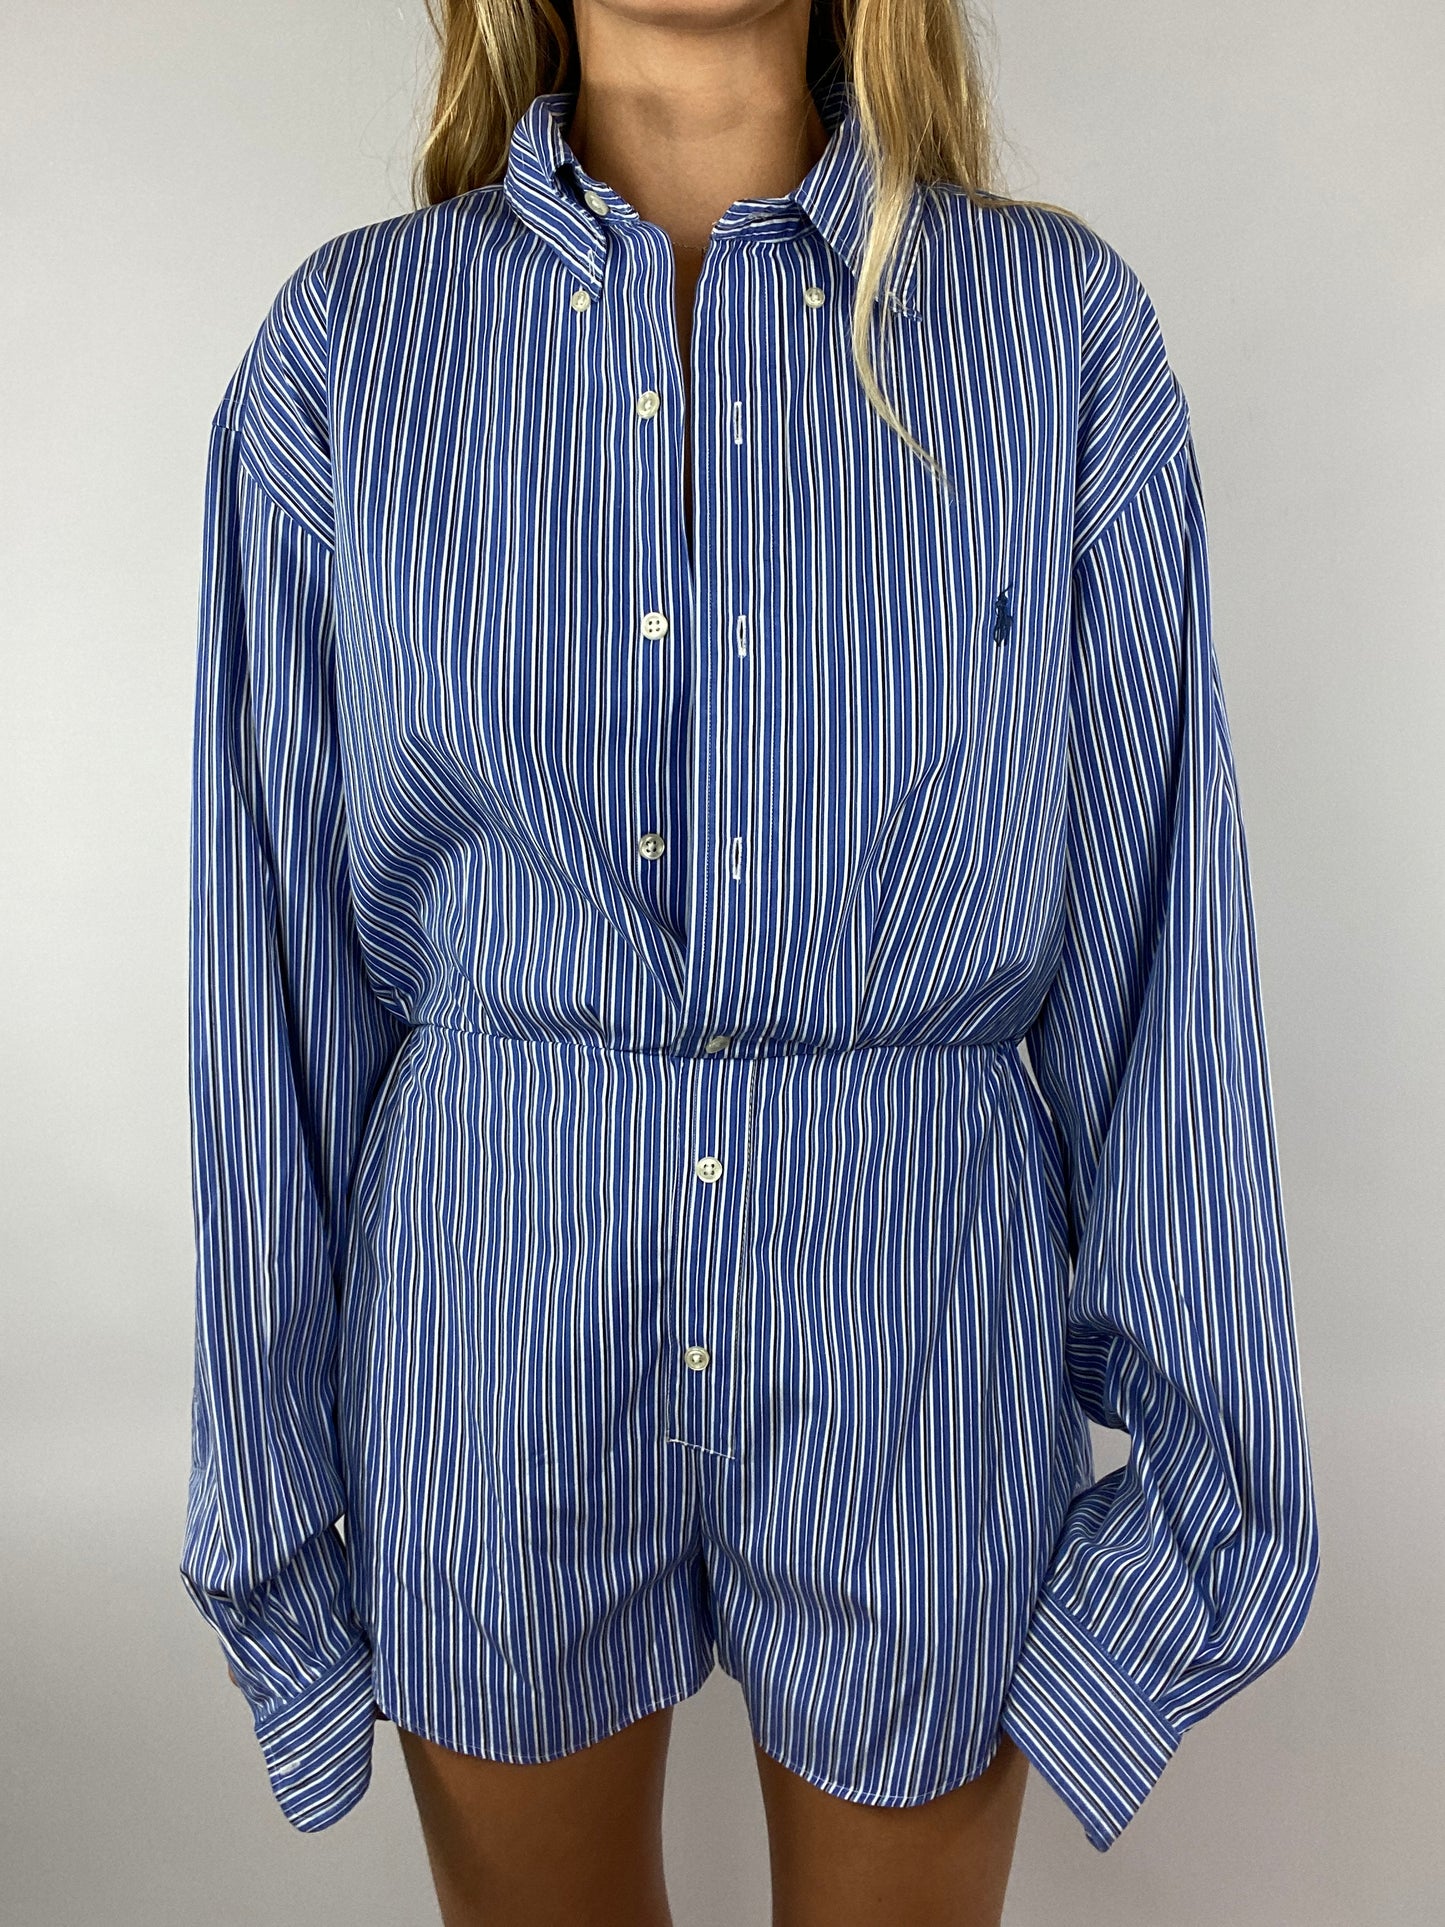 Upcycled blue striped jumpsuit